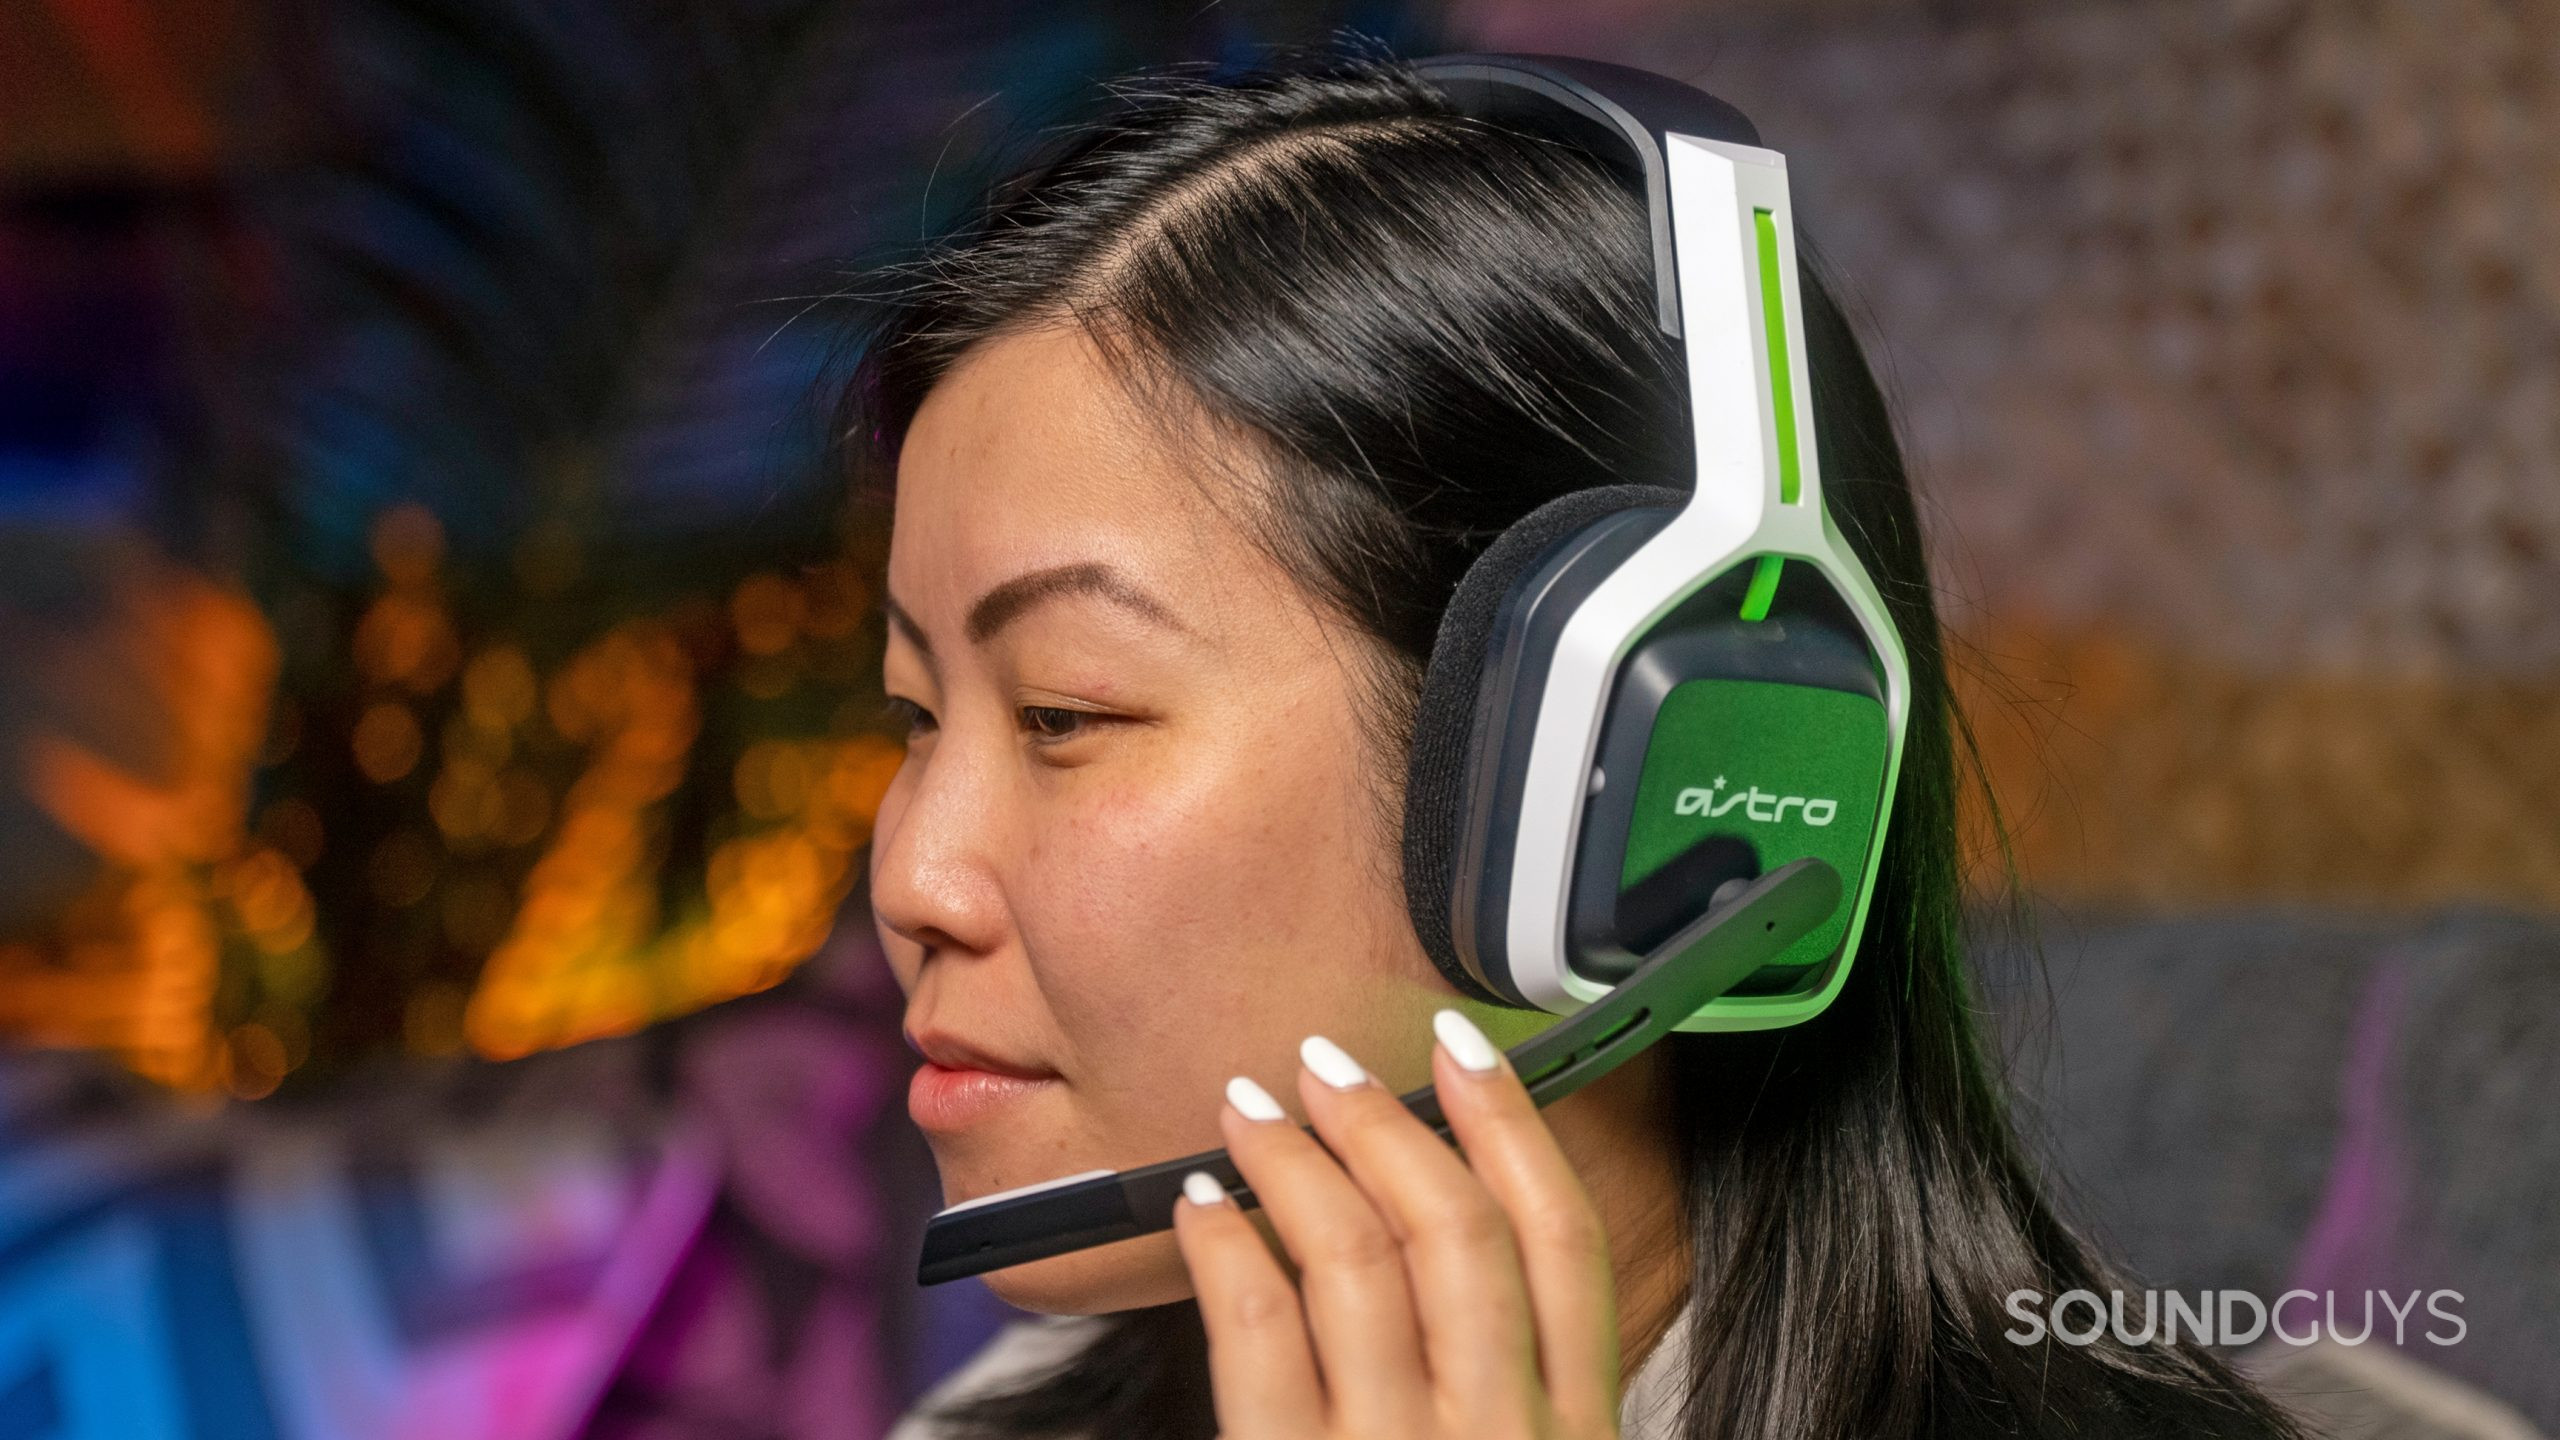 A woman wears the Astro A20 gaming headset at the SoundGuys offices.